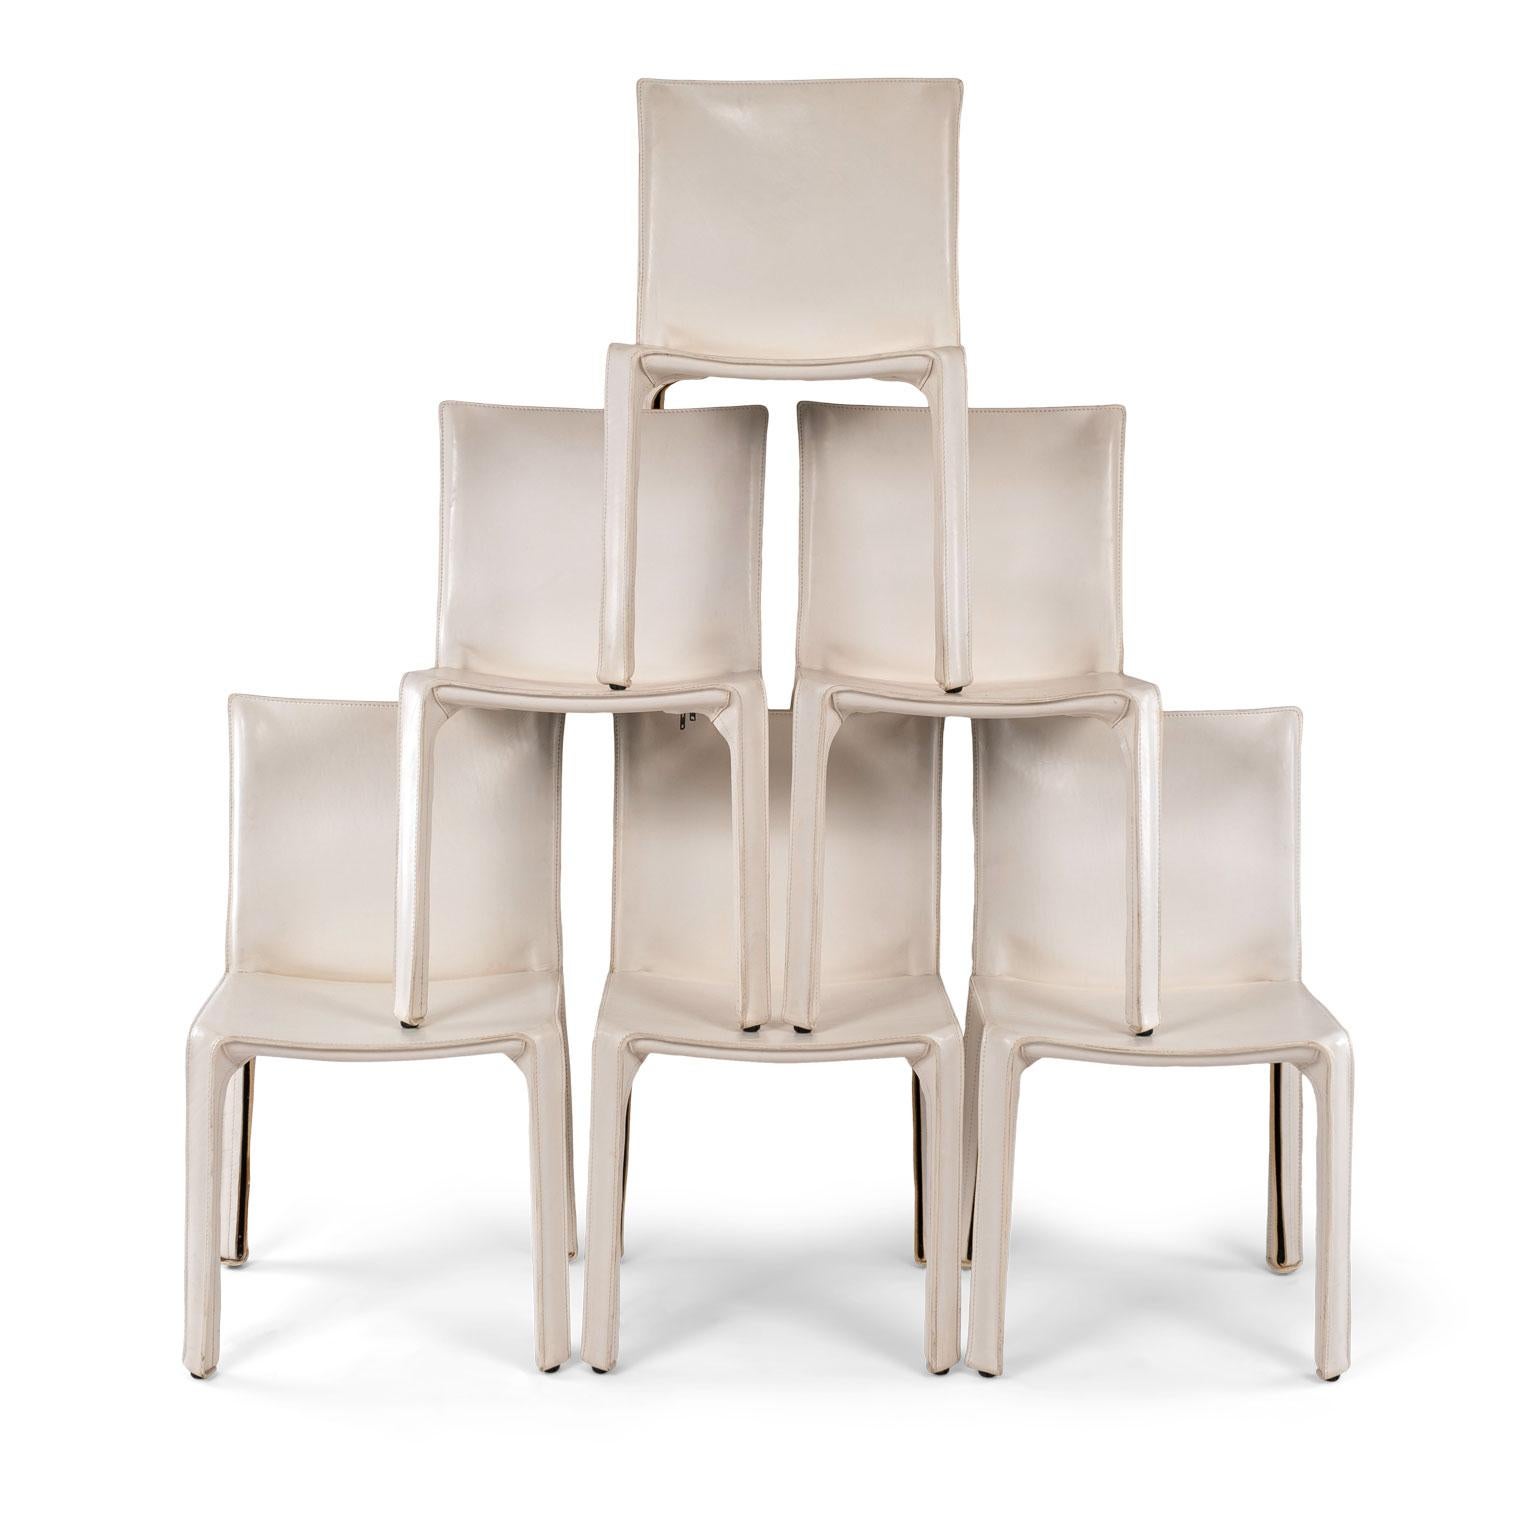 Six white vintage Mario Bellini cab 412 side chairs, fabricated by Cassina in the 1980s. Flexible steel frame covered with a skin of high quality white saddle leather. This elegant, versatile chair is equally suitable for the dining room, study or